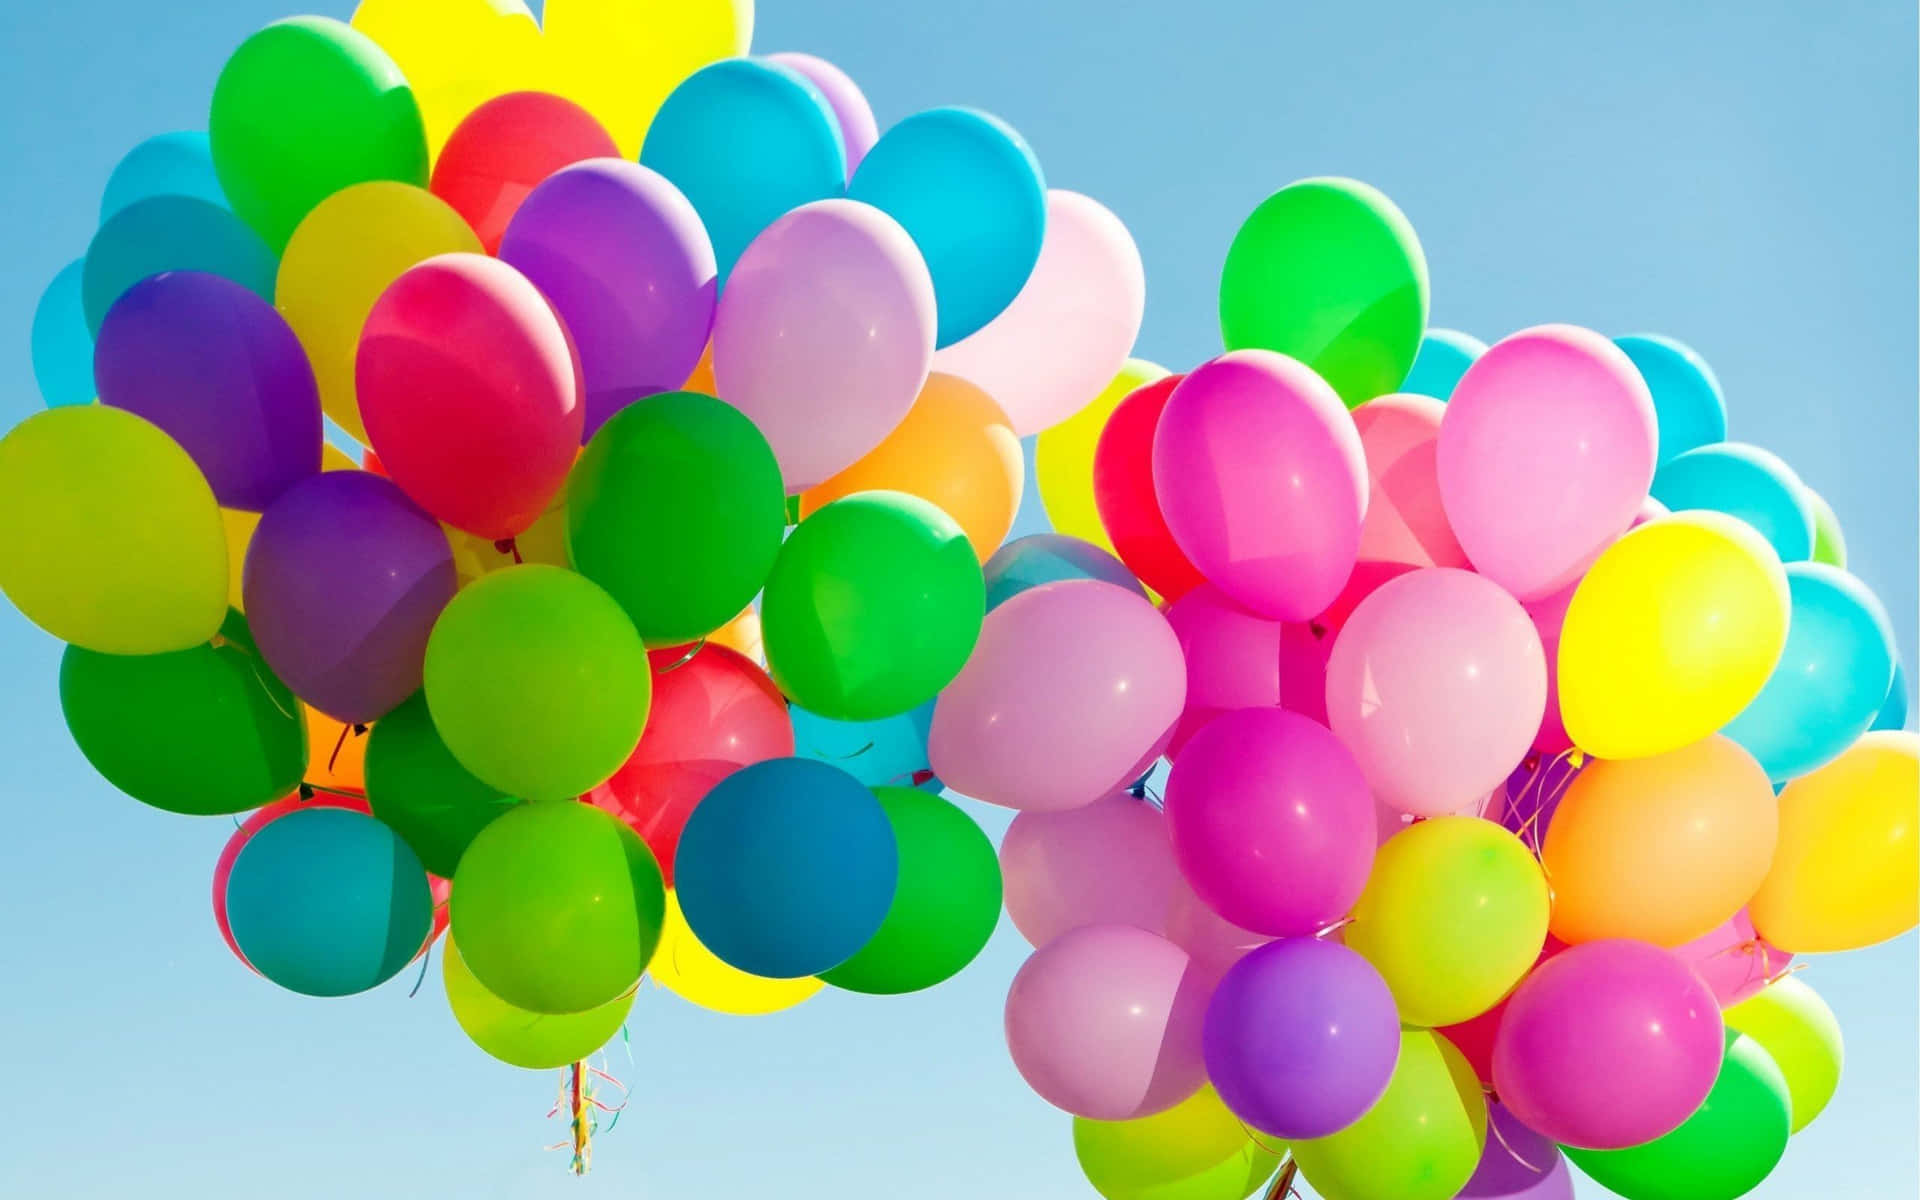 Colorful Balloons Flying In The Sky